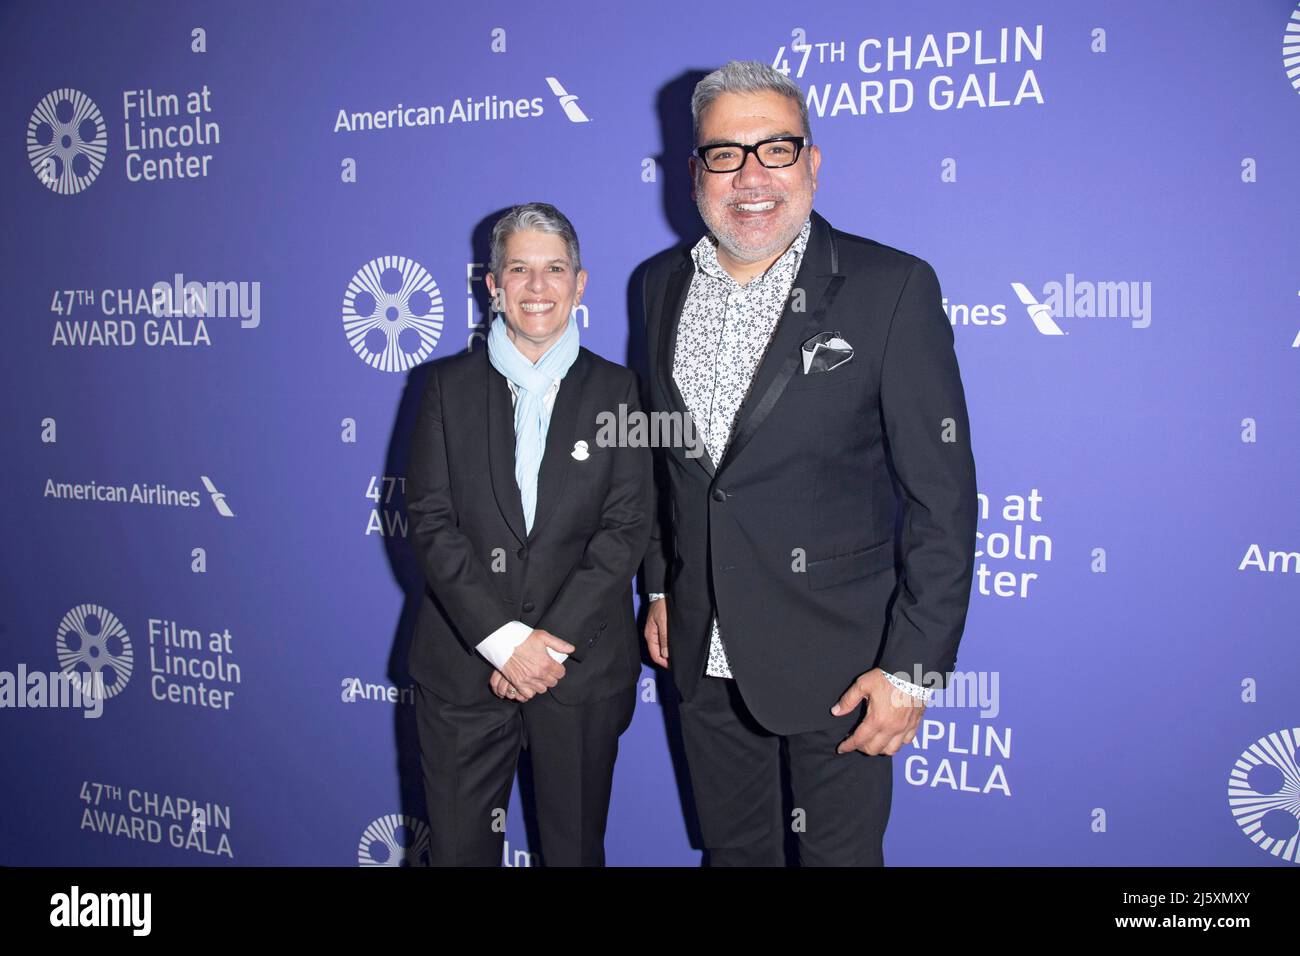 New York, United States. 25th Apr, 2022. FLC President Lesli Klainberg and Senior Vice President of FLC and Executive Director of the New York Film Festival Eugene Hernandez attend the 47th Chaplin Award Gala honoring Cate Blanchett at Alice Tully Hall, Lincoln Center in New York City. (Photo by Ron Adar/SOPA Images/Sipa USA) Credit: Sipa USA/Alamy Live News Stock Photo